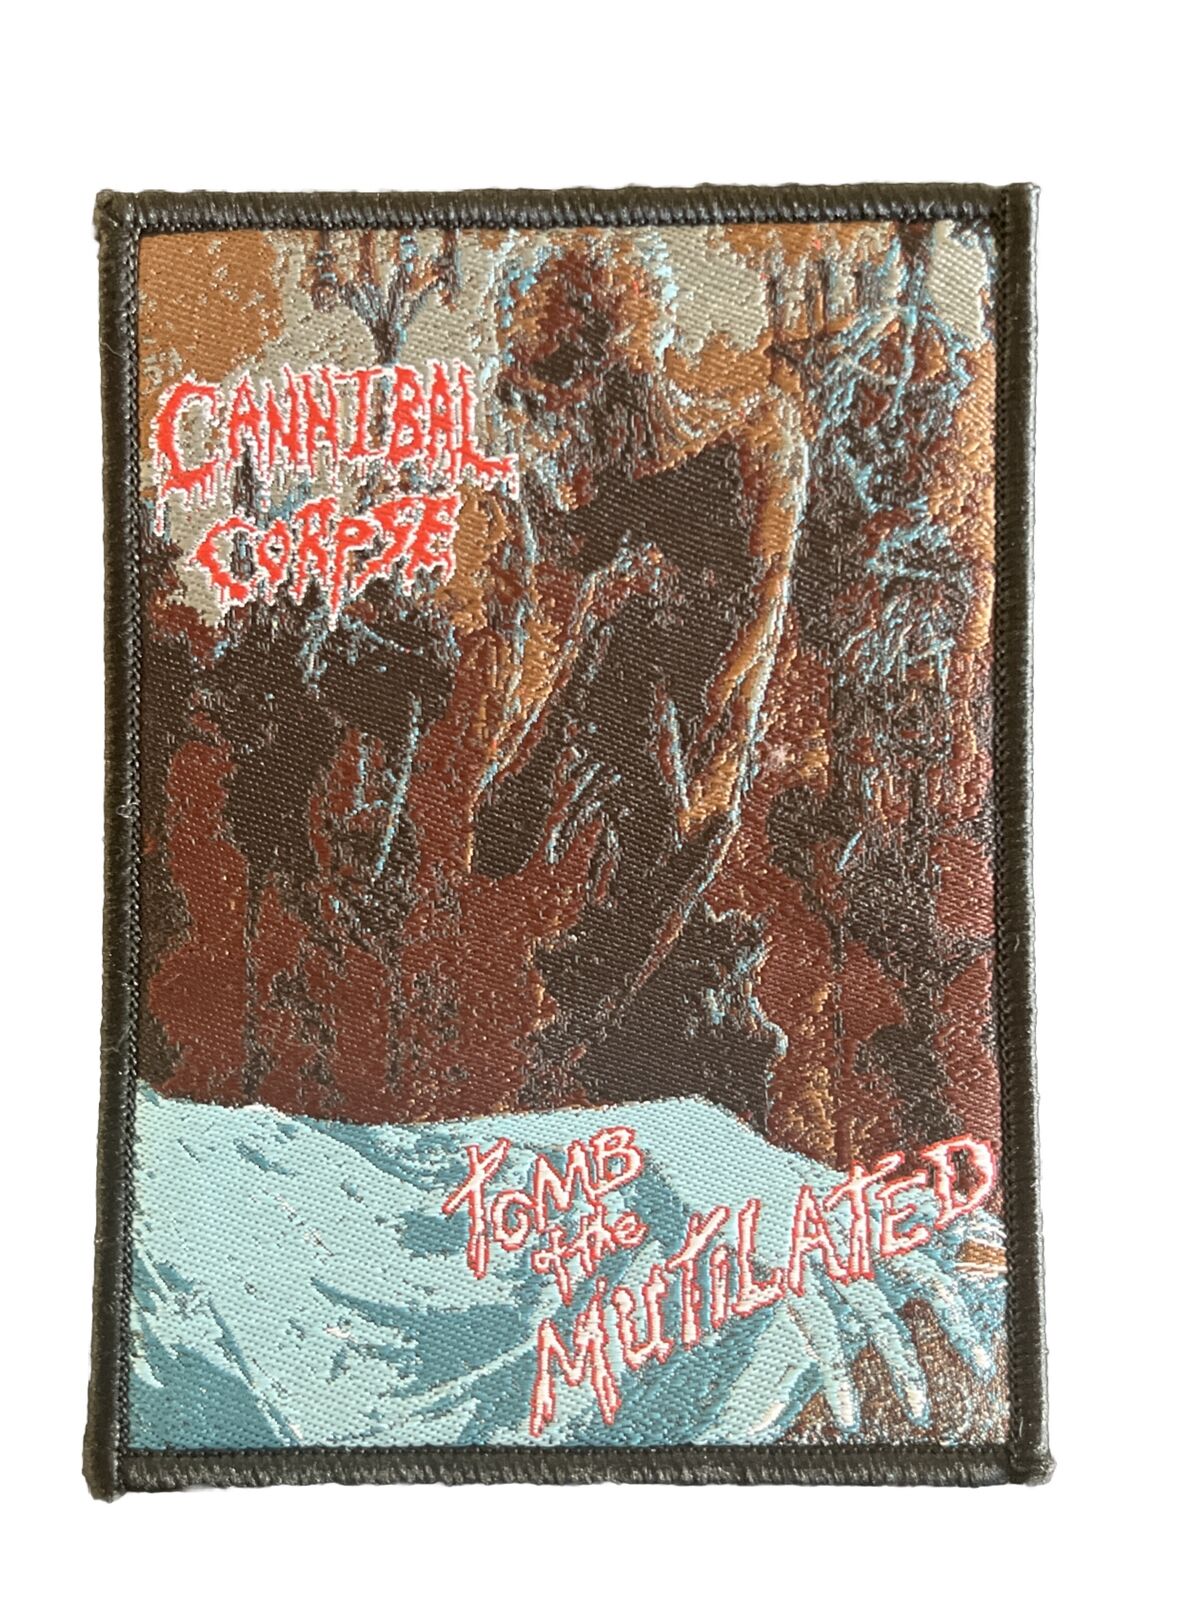 Cannibal Corpse - Tomb of the Mutilated (Black)